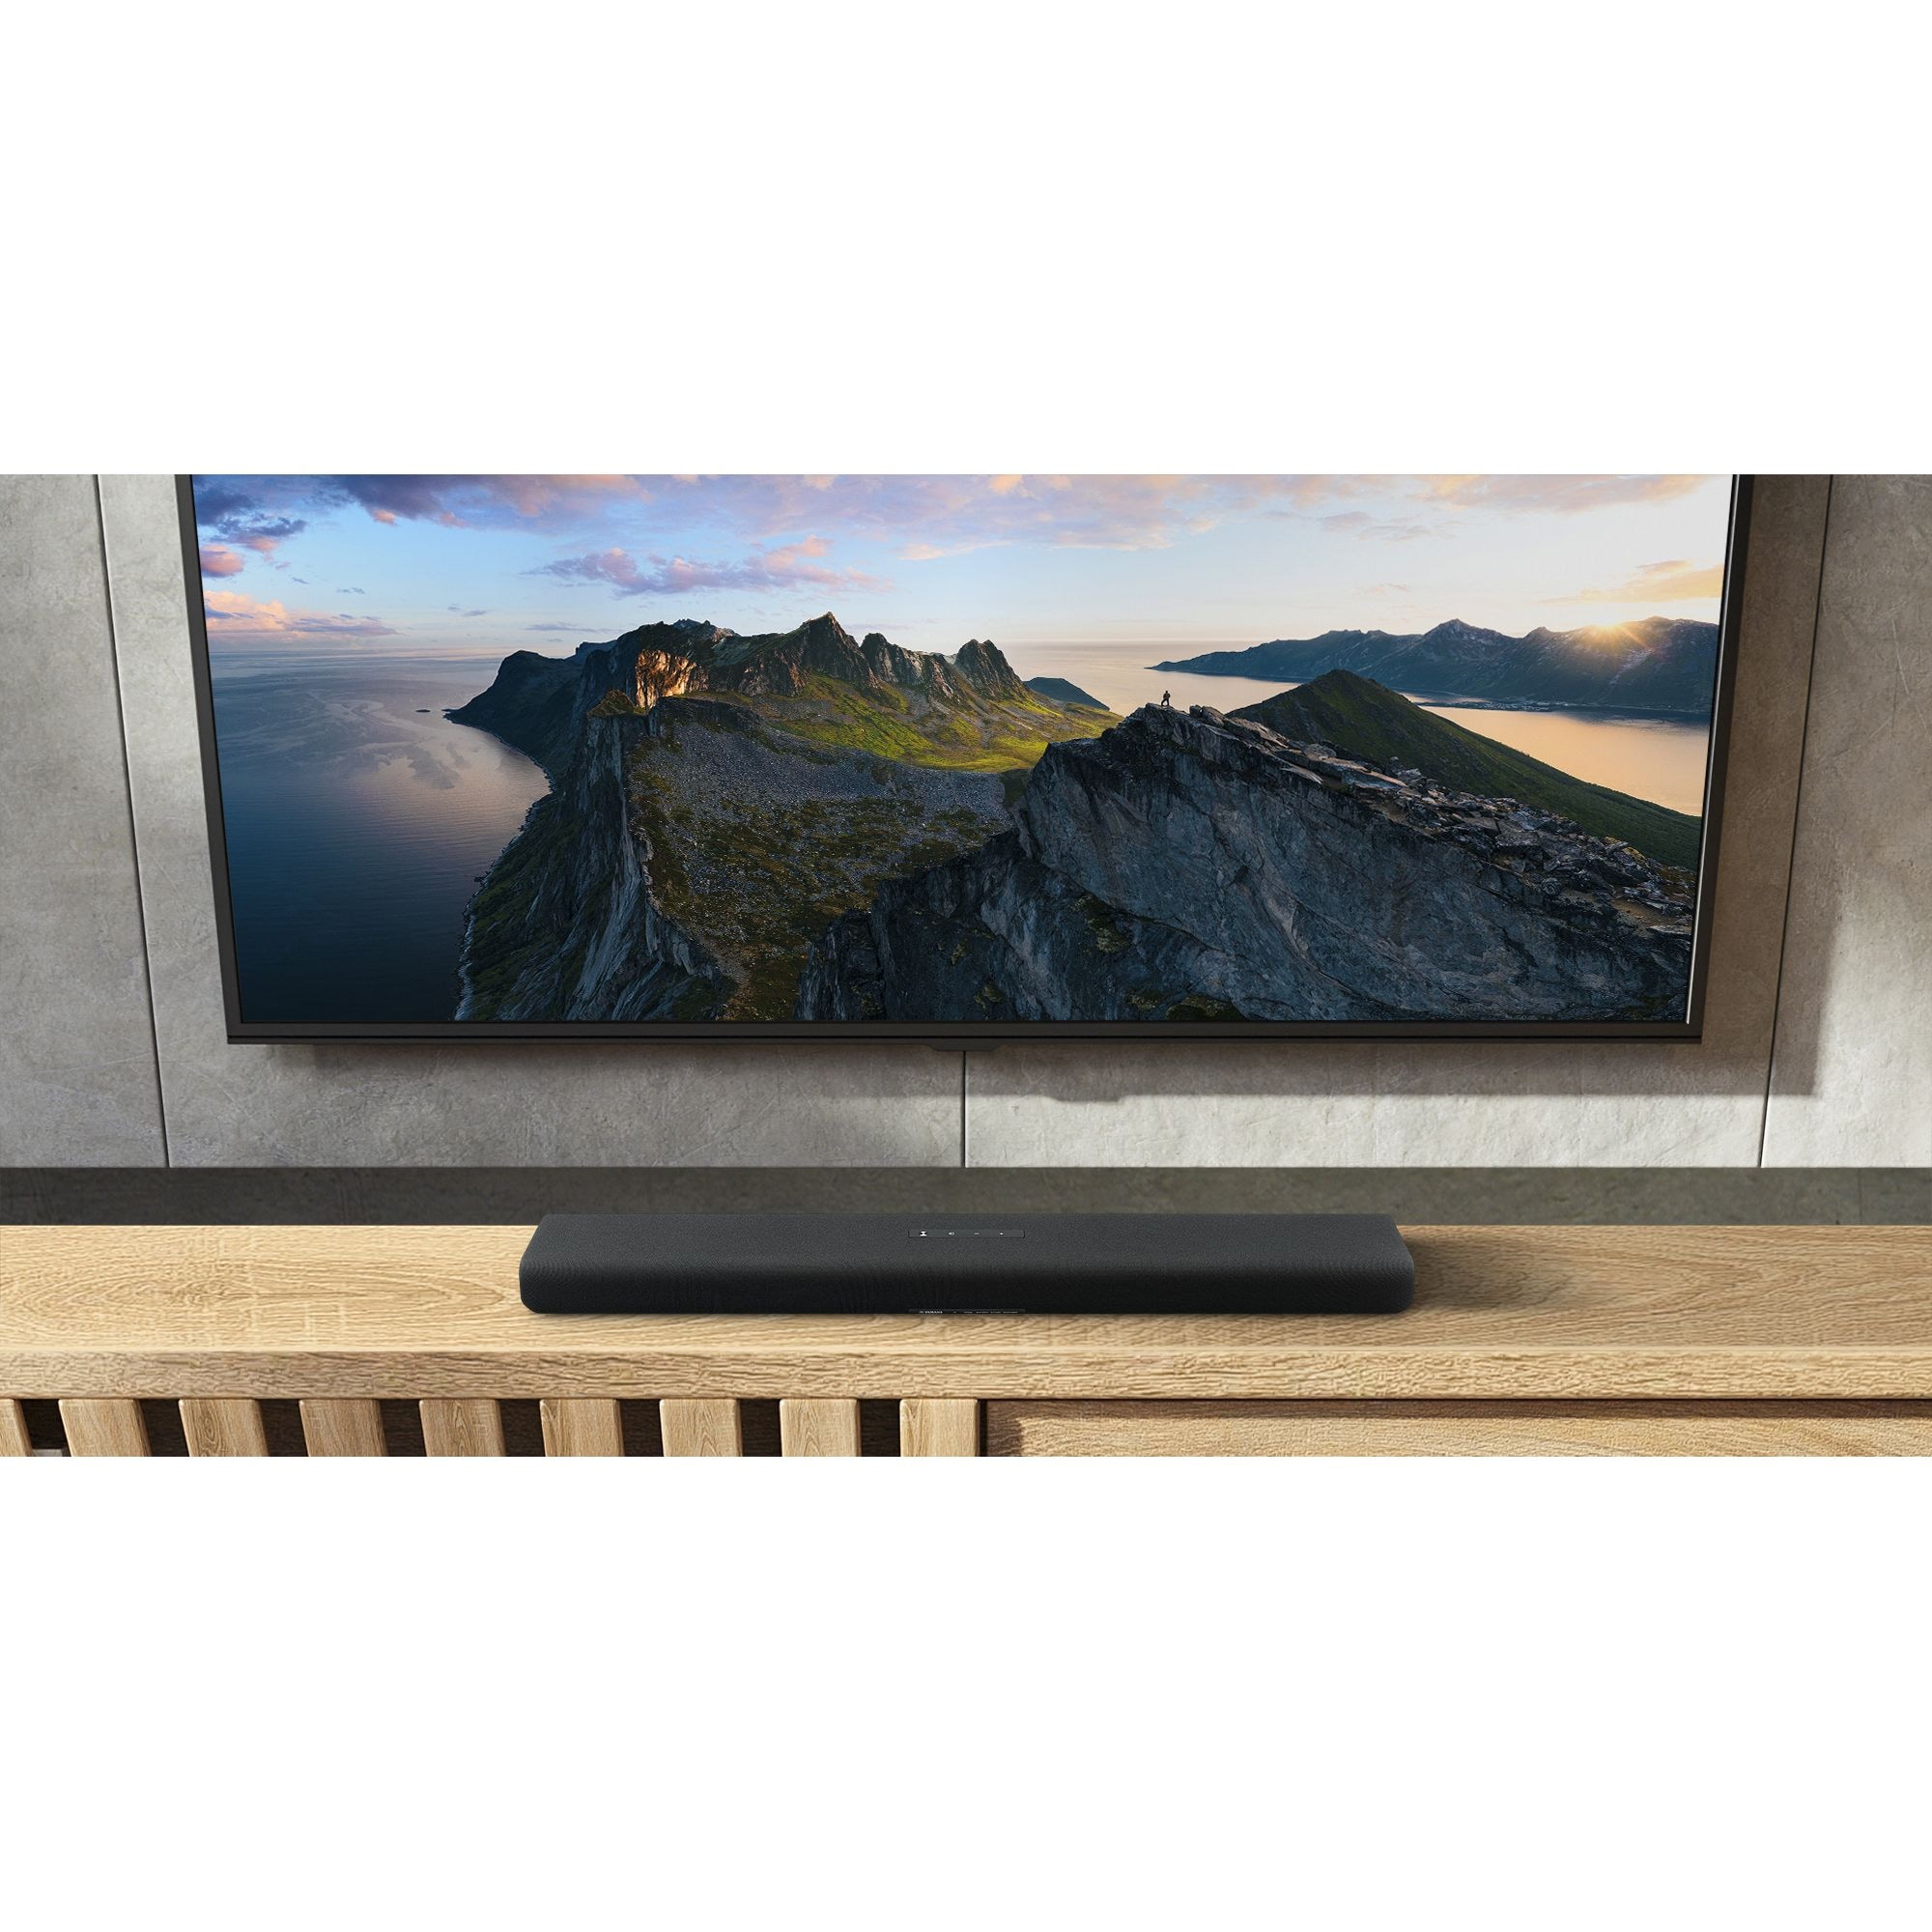 Yamaha Sr-b30a Sound Bar With Dolby Atmos & Built-in Subwoofers